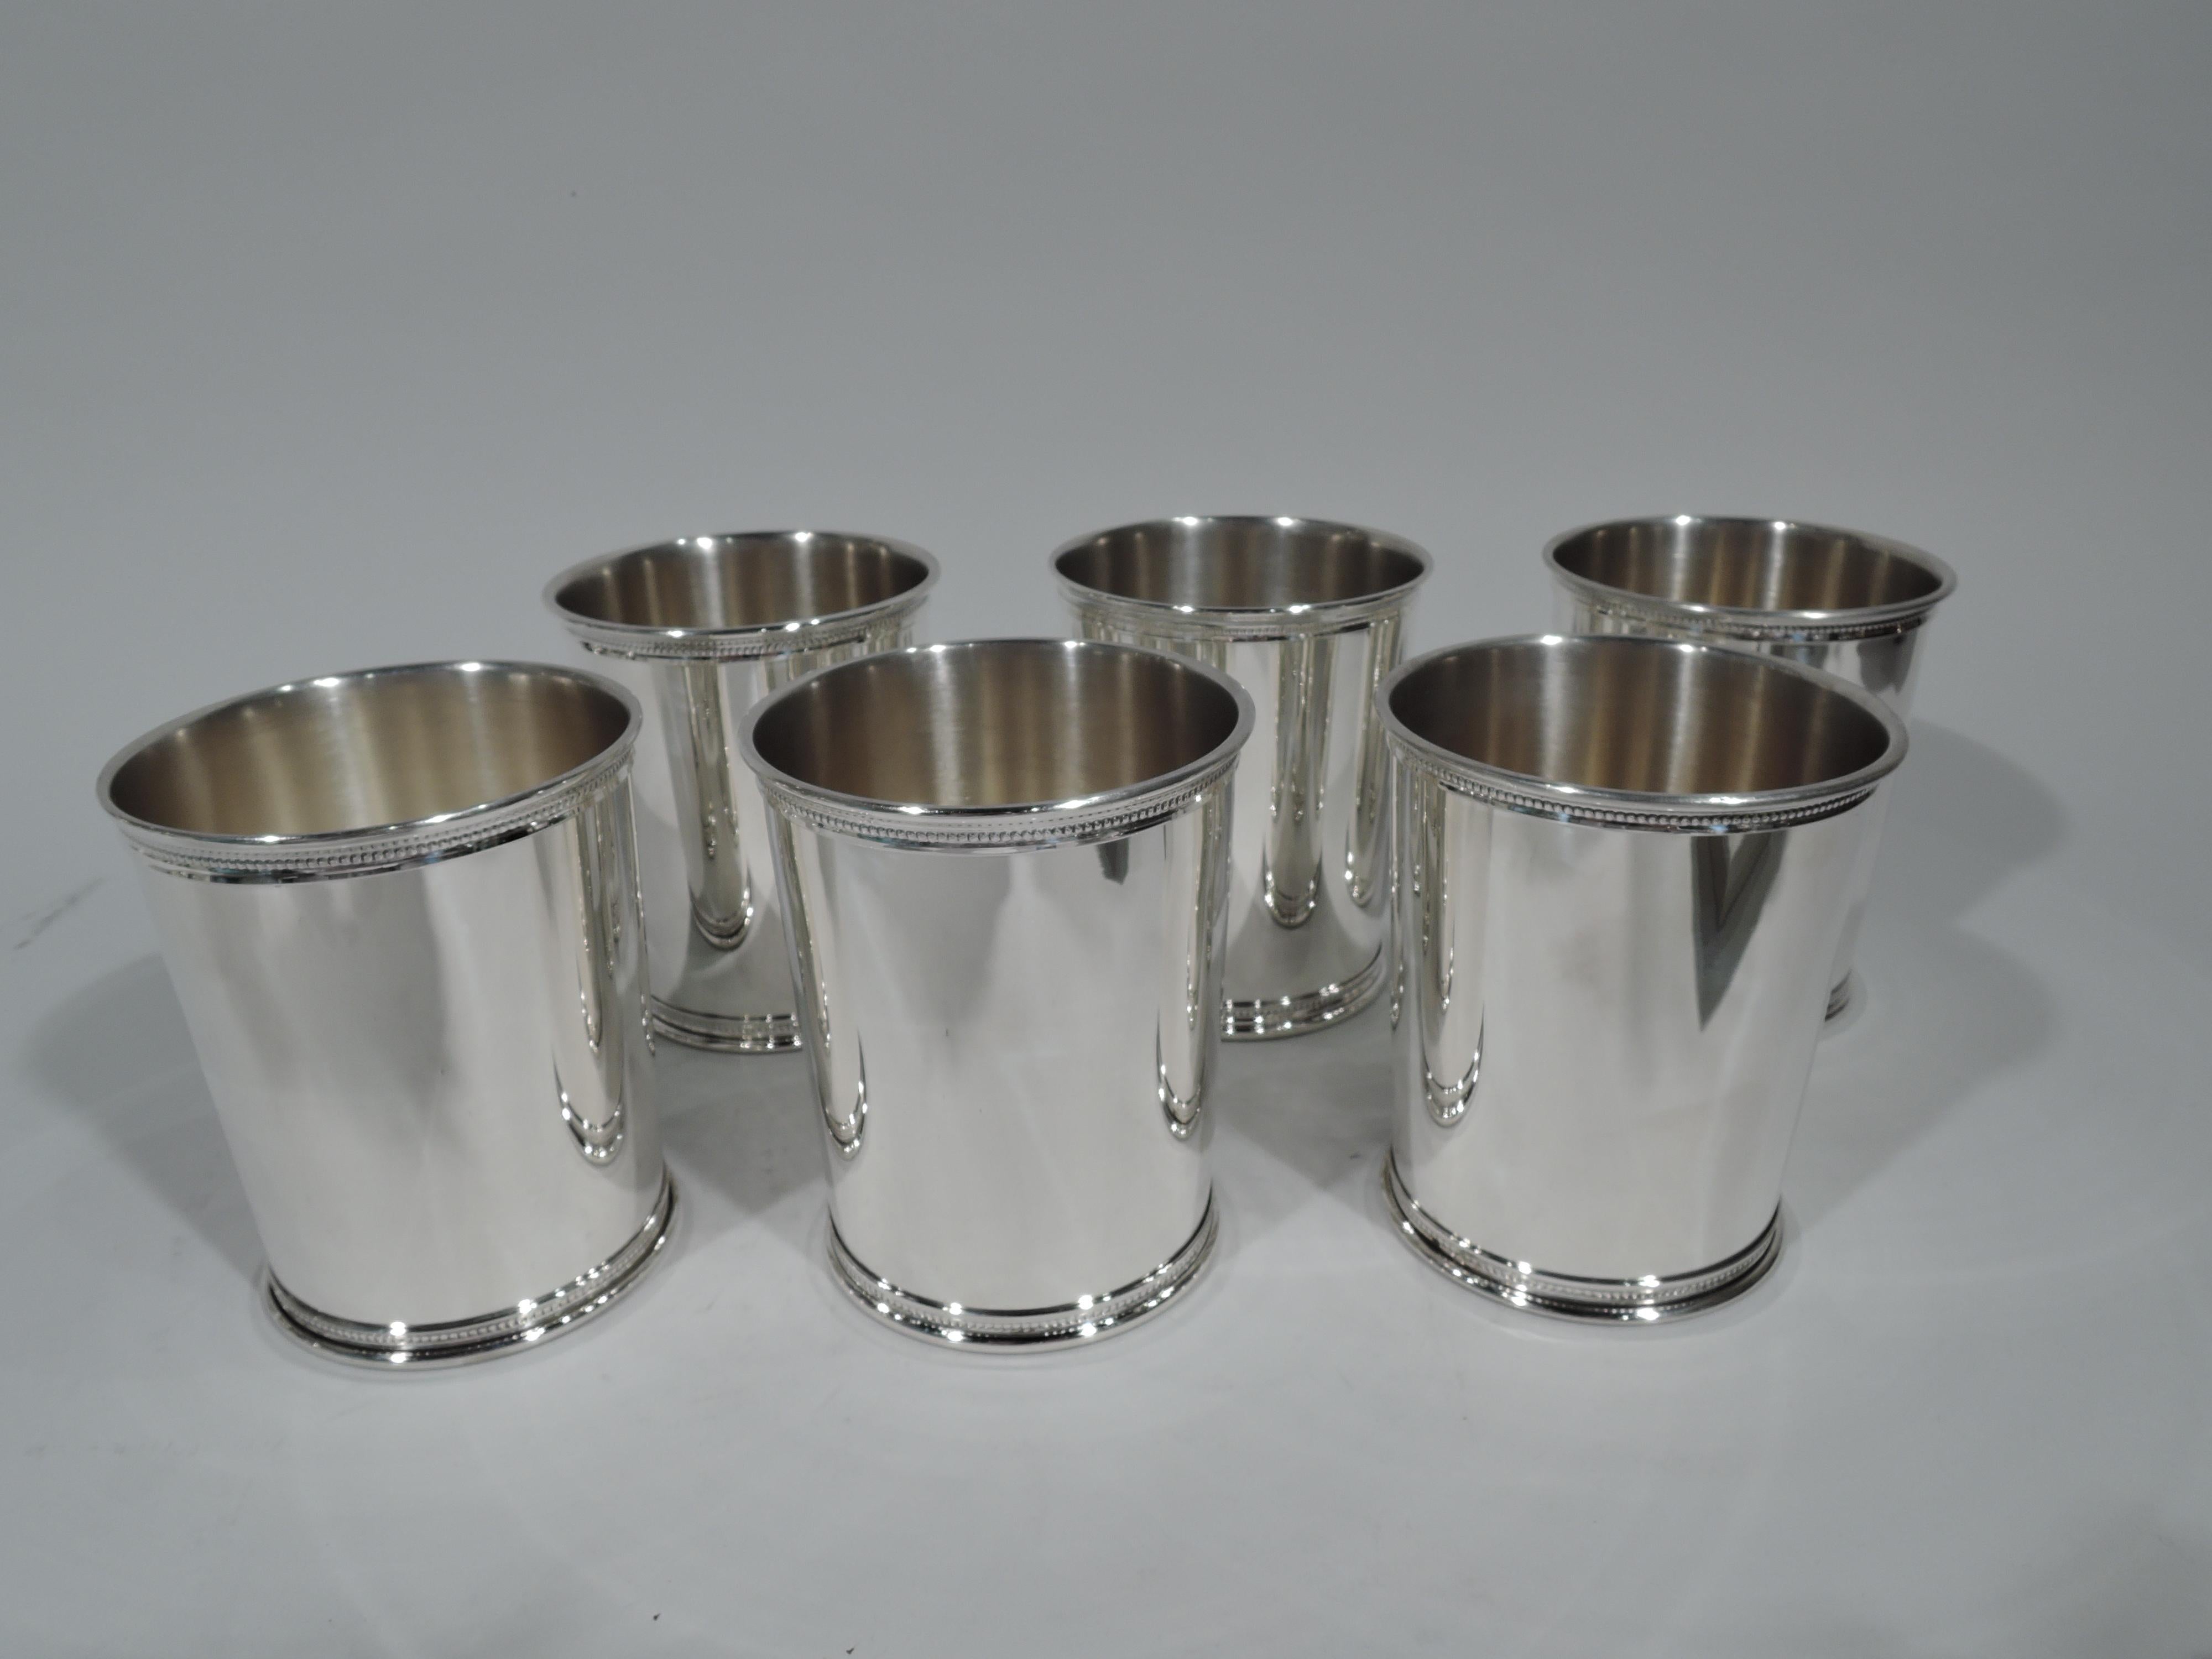 Set of 6 sterling silver mint julep cups. Made by Reed & Barton in Taunton, mass. Each: Straight and tapering sides and beaded rim and foot. Hallmark includes no. X253 and presidential date code JEC for James Earl Carter (1977-1981). Total weight: